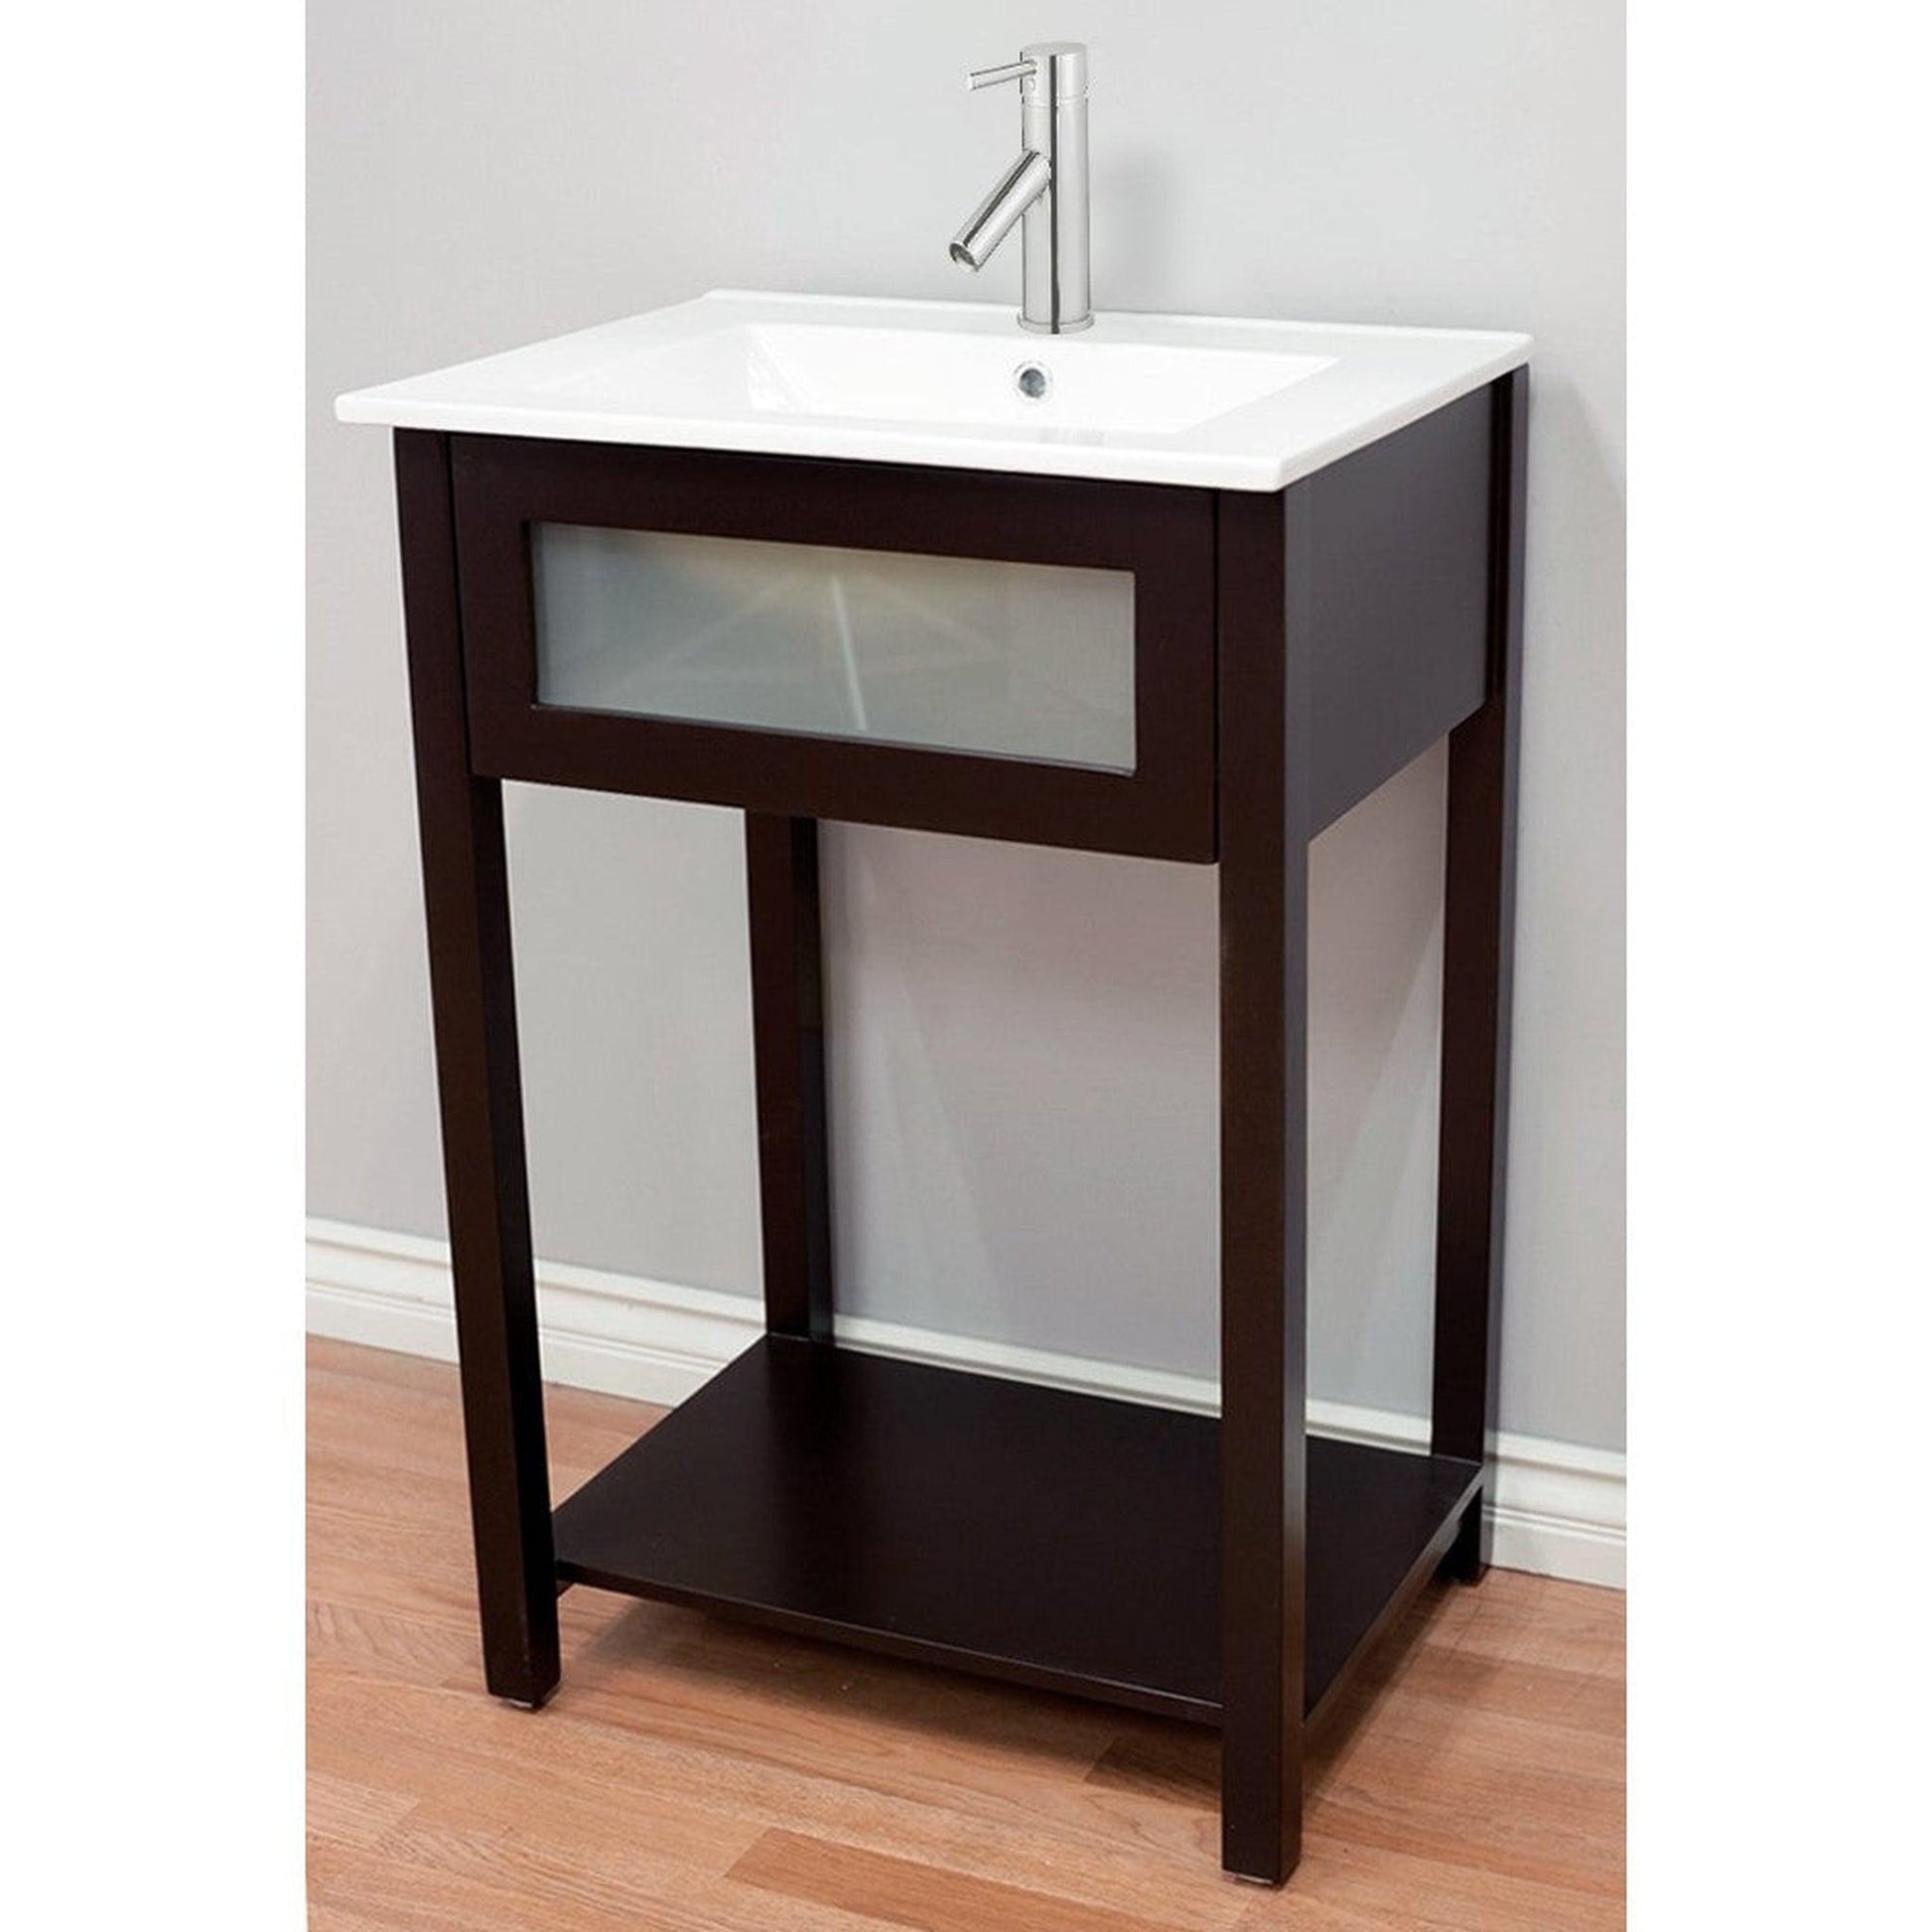 Bellaterra Home 24" Espresso Freestanding Vanity Set With Ceramic Integrated Sink and Ceramic Top, and Mirror & Faucet